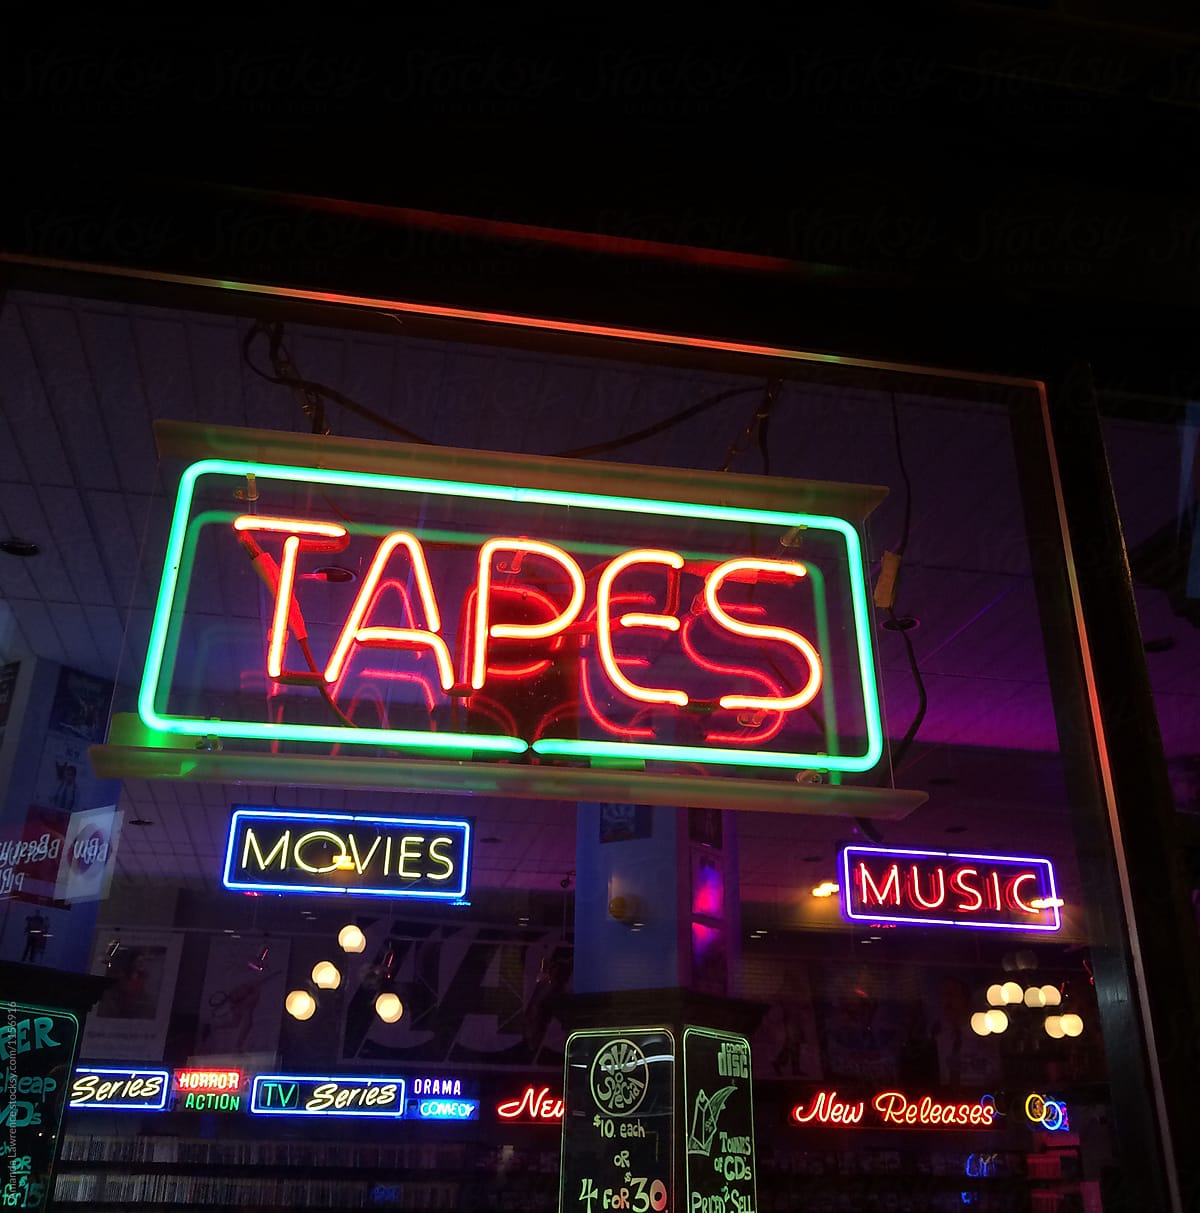 Tapes, Movies, Music